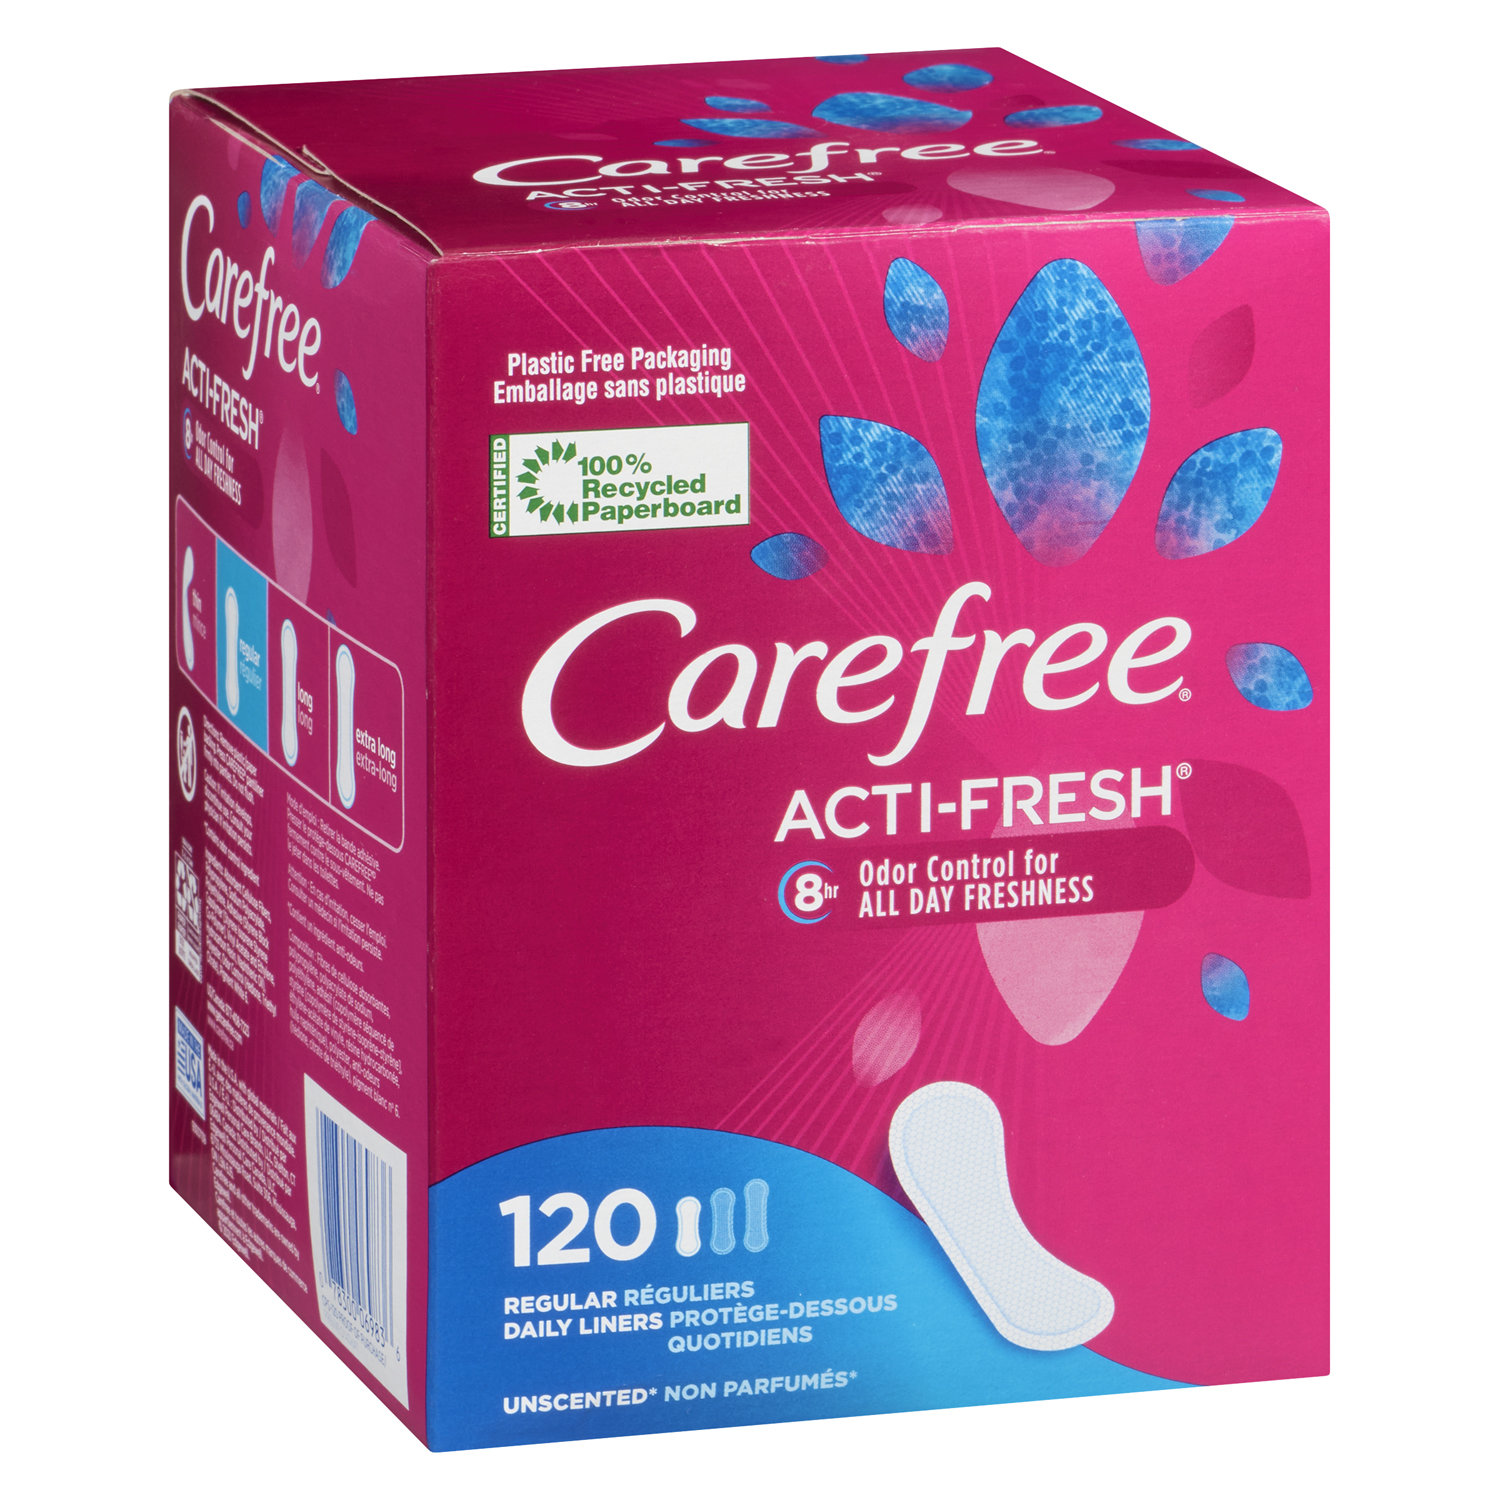 Carefree Barely There Unscented Liners Panty Liners 42 Pack